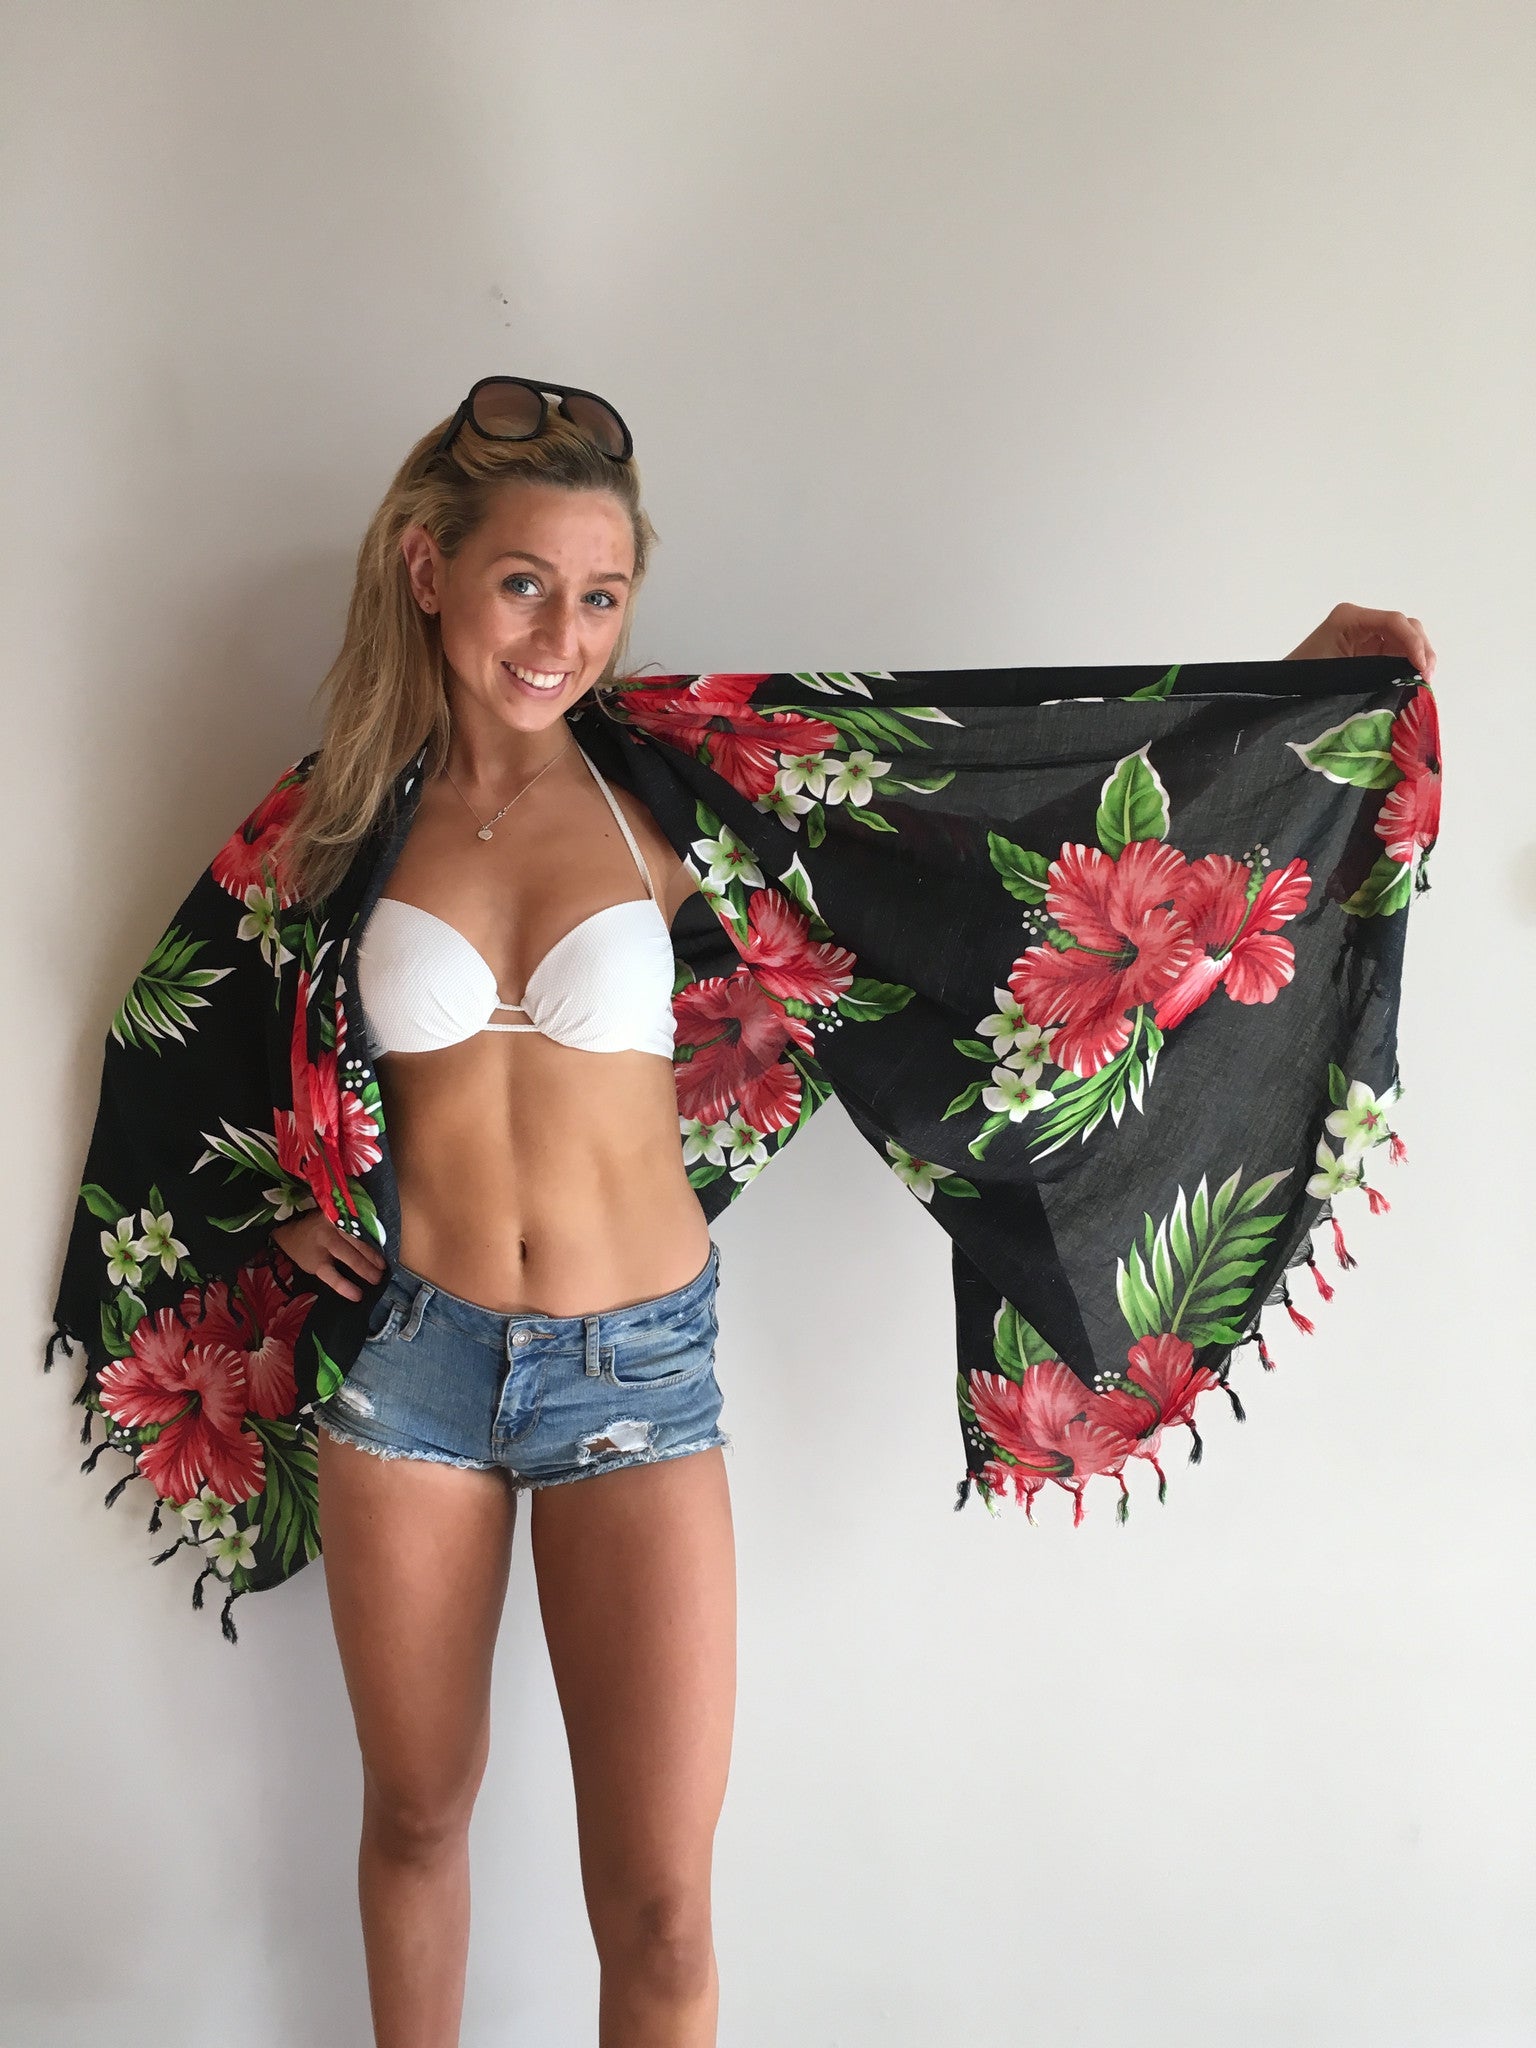 Amelia Evans on 6 ways to wear YOUR sarong